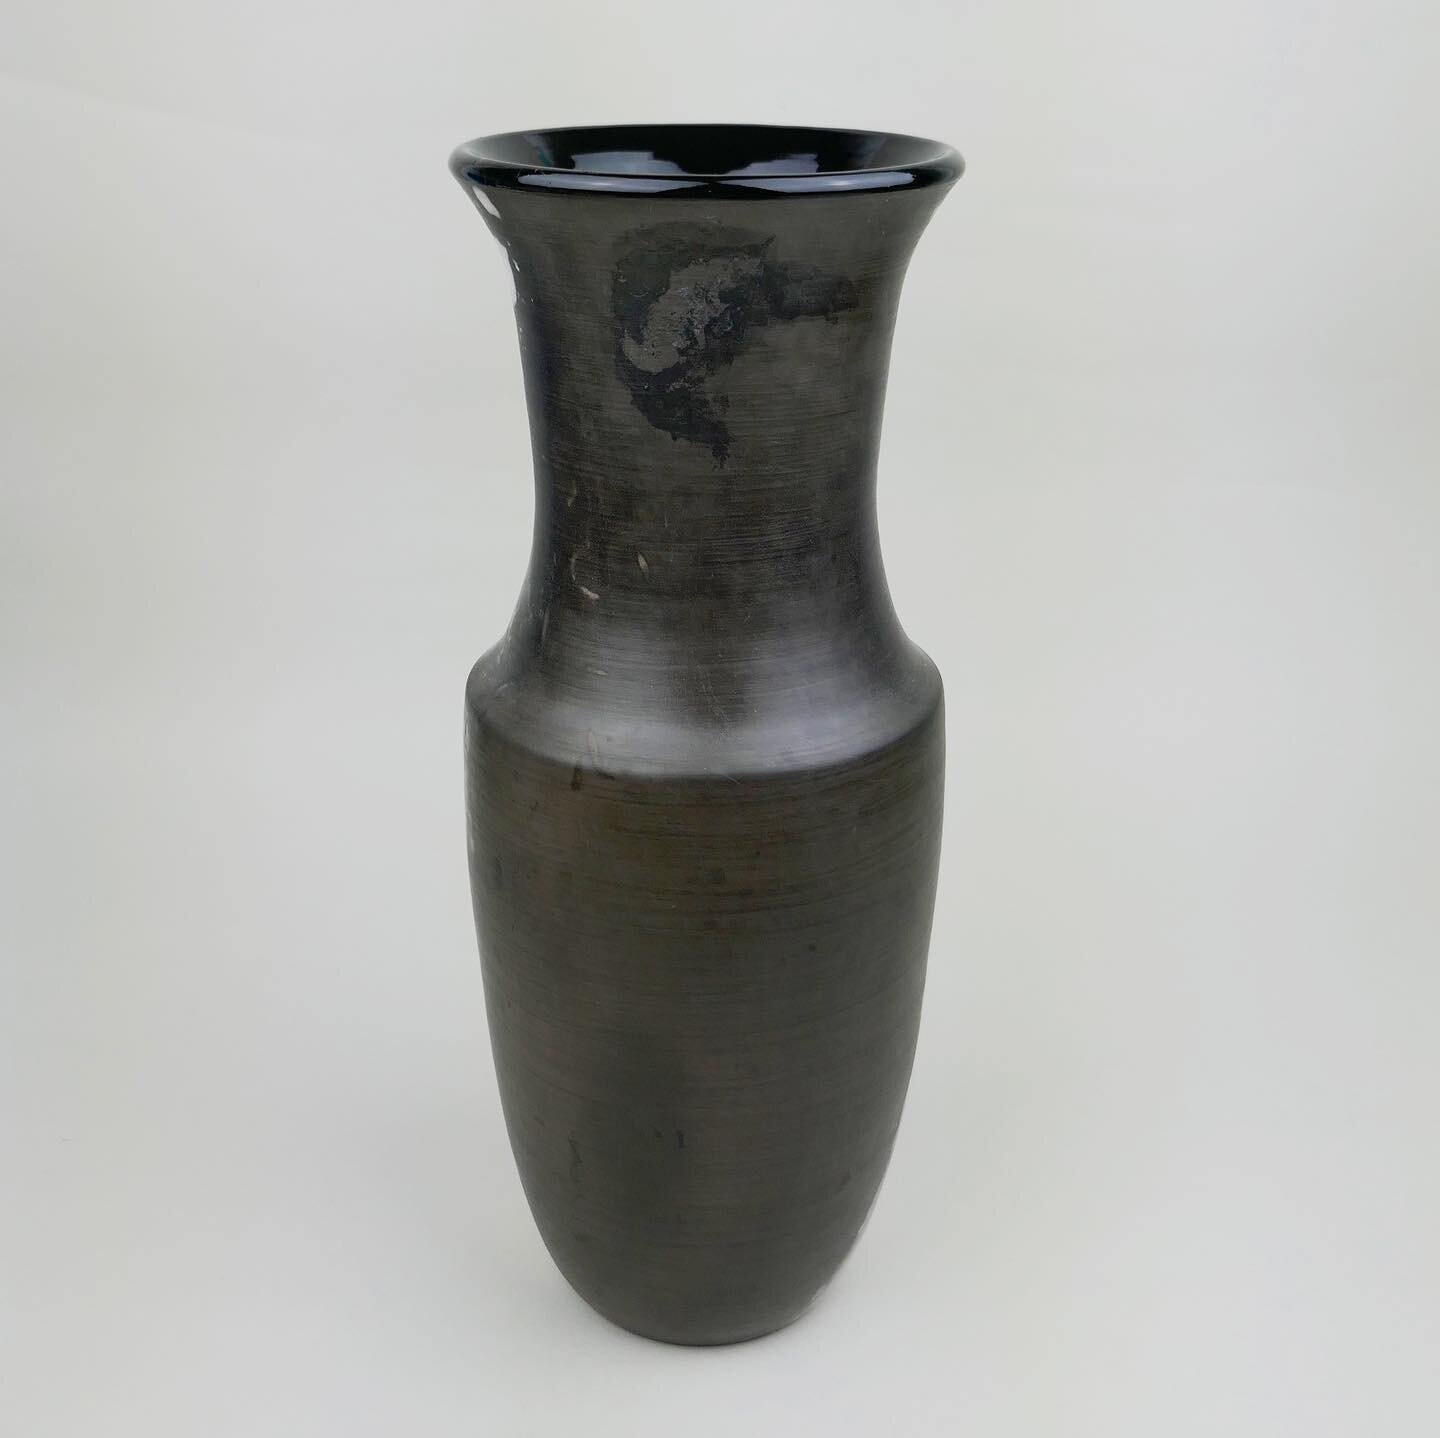 I&rsquo;m very pleased that this piece has been selected to be part of the @throwncontemporary gallery&rsquo;s Winter Exhibition. 

Black Mirror vase, 30cm high. Wheel thrown then pitfired with reused and foraged organic material (including sawdust, 